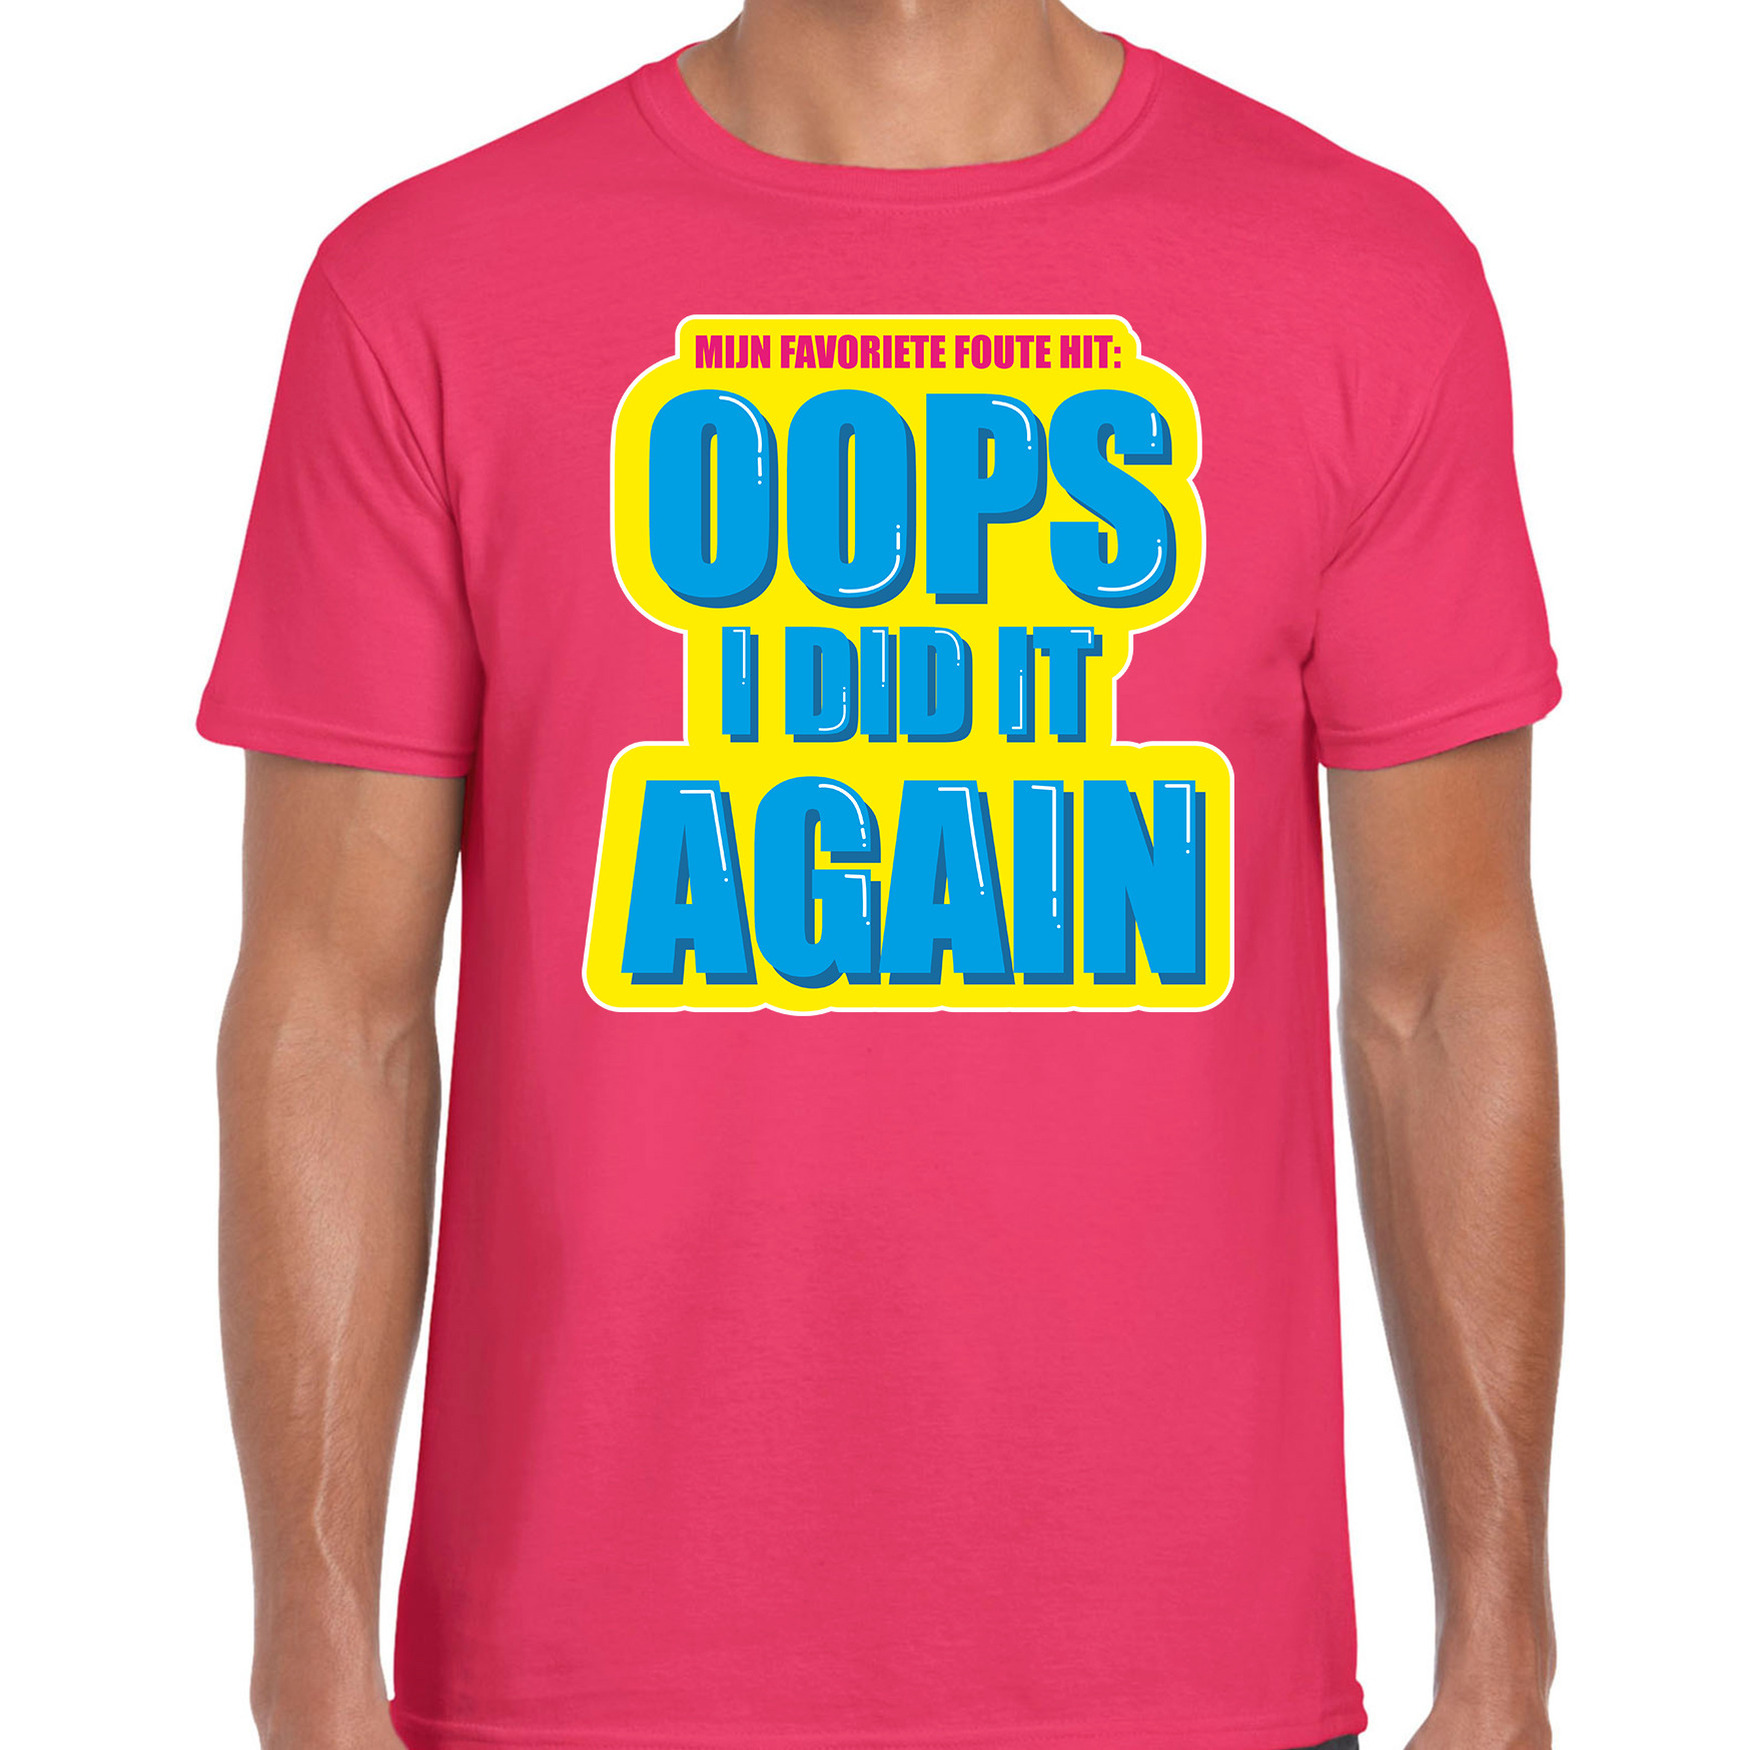 Foute party Oops I did it again verkleed t-shirt roze heren Foute party hits outfit- kleding